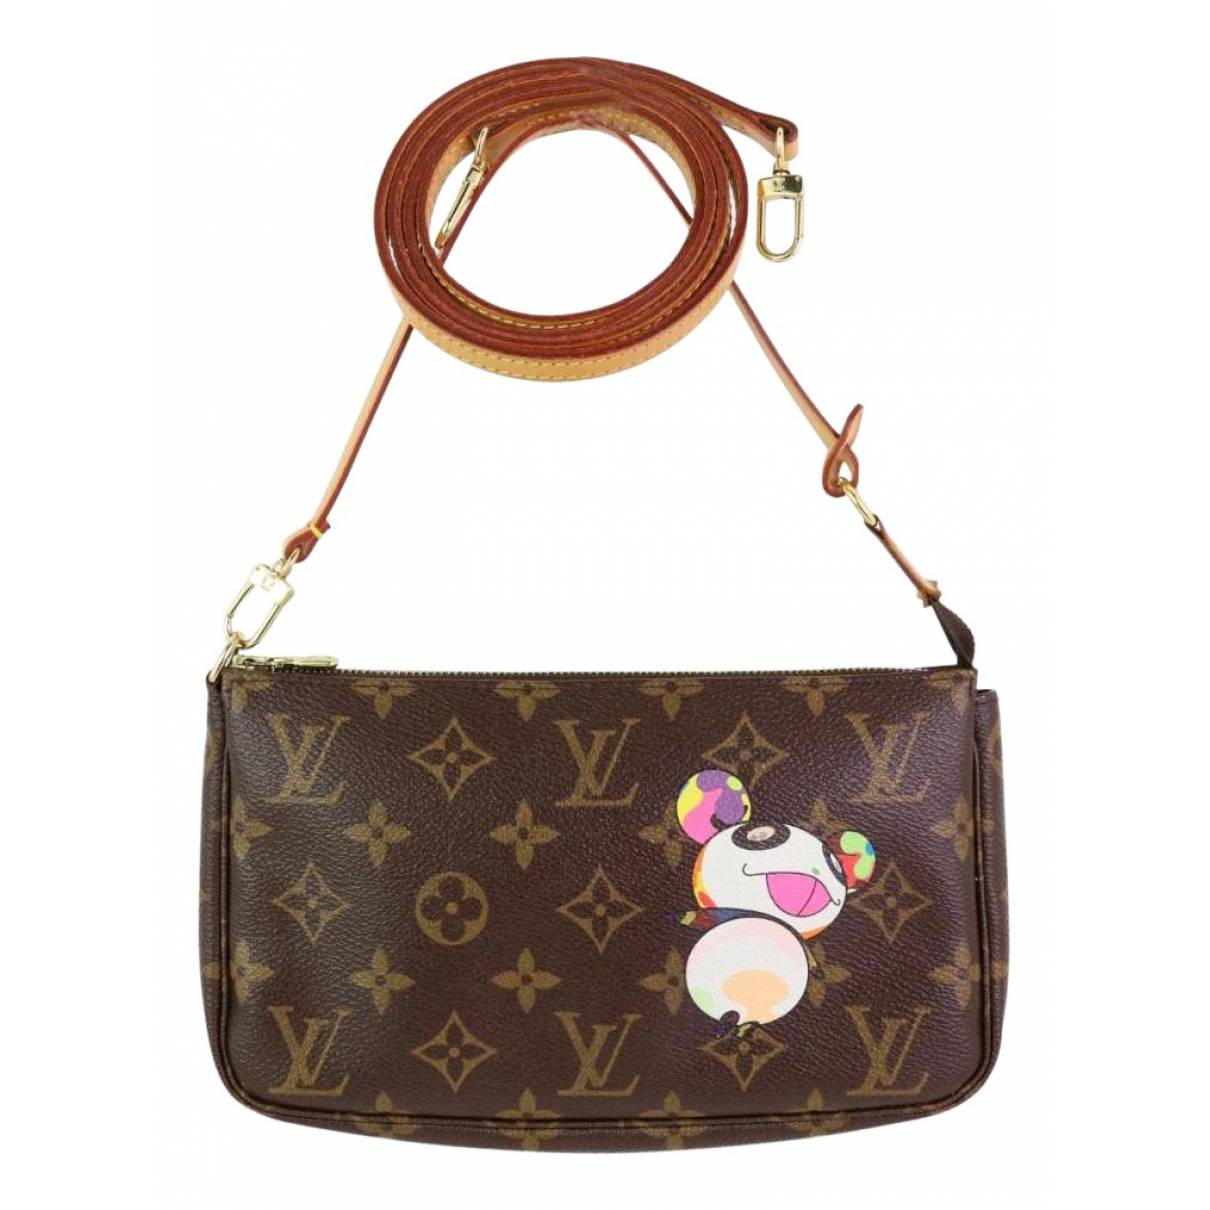 Authenticated Used Rare limited edition Louis Vuitton LOUIS